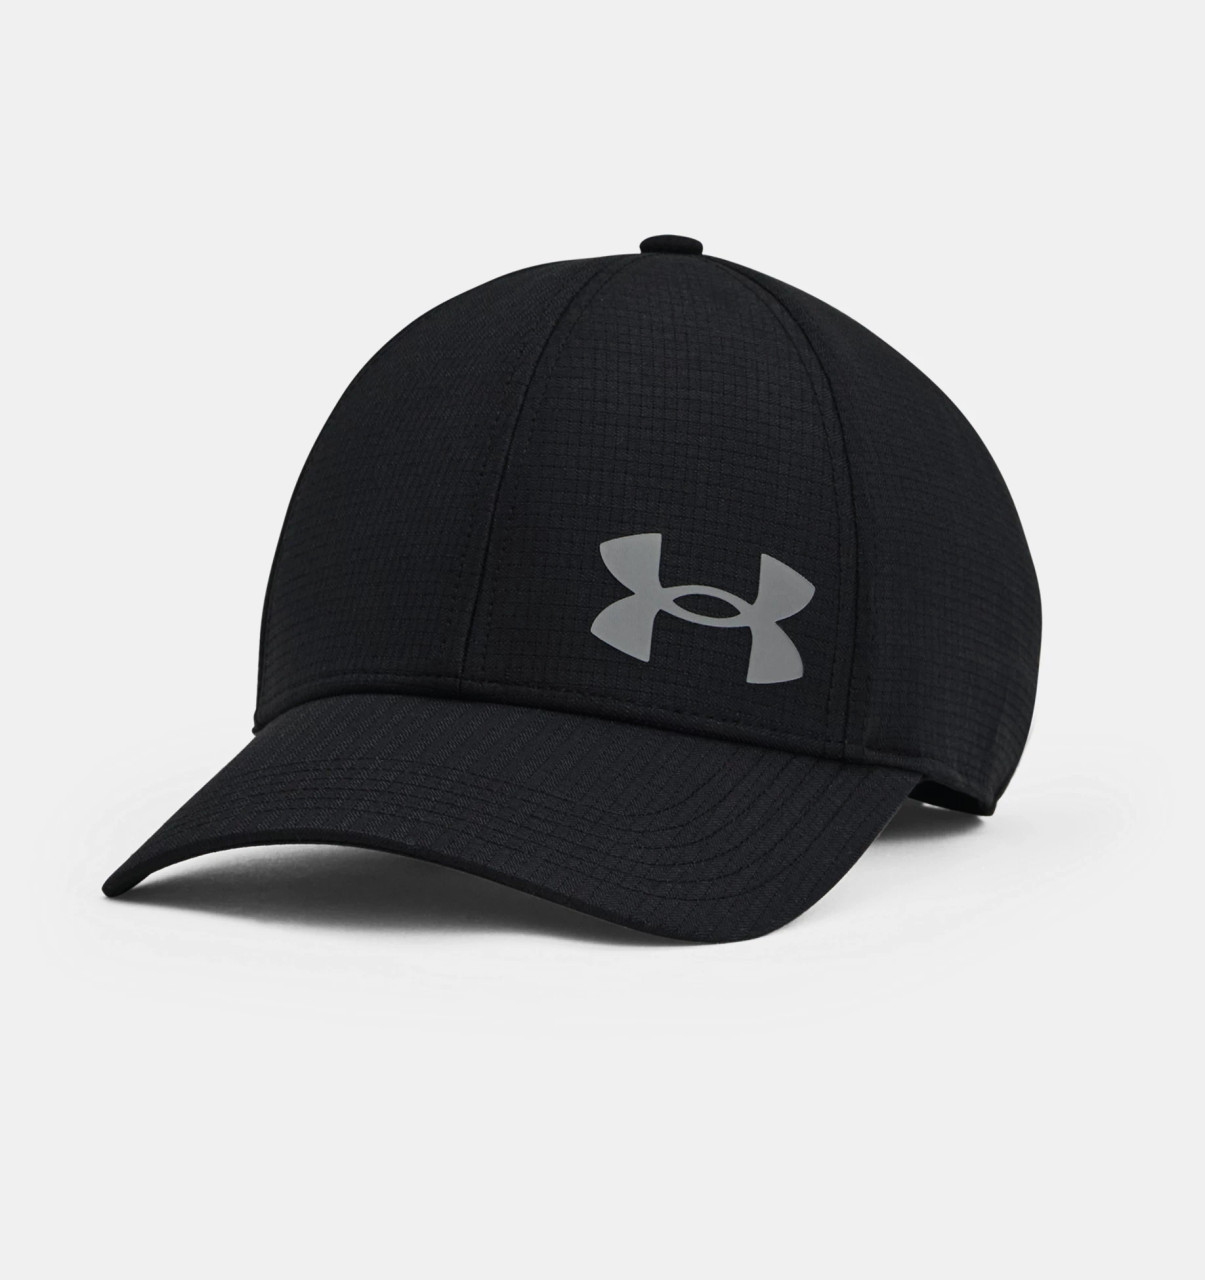 https://cdn11.bigcommerce.com/s-e7wr5xw2bd/images/stencil/1280x1280/products/2539/7999/1361530-001-under-armour-Mens-Chill-ArmourVent-Stretch-Hat-01__25731.1641826254.jpg?c=1?imbypass=on